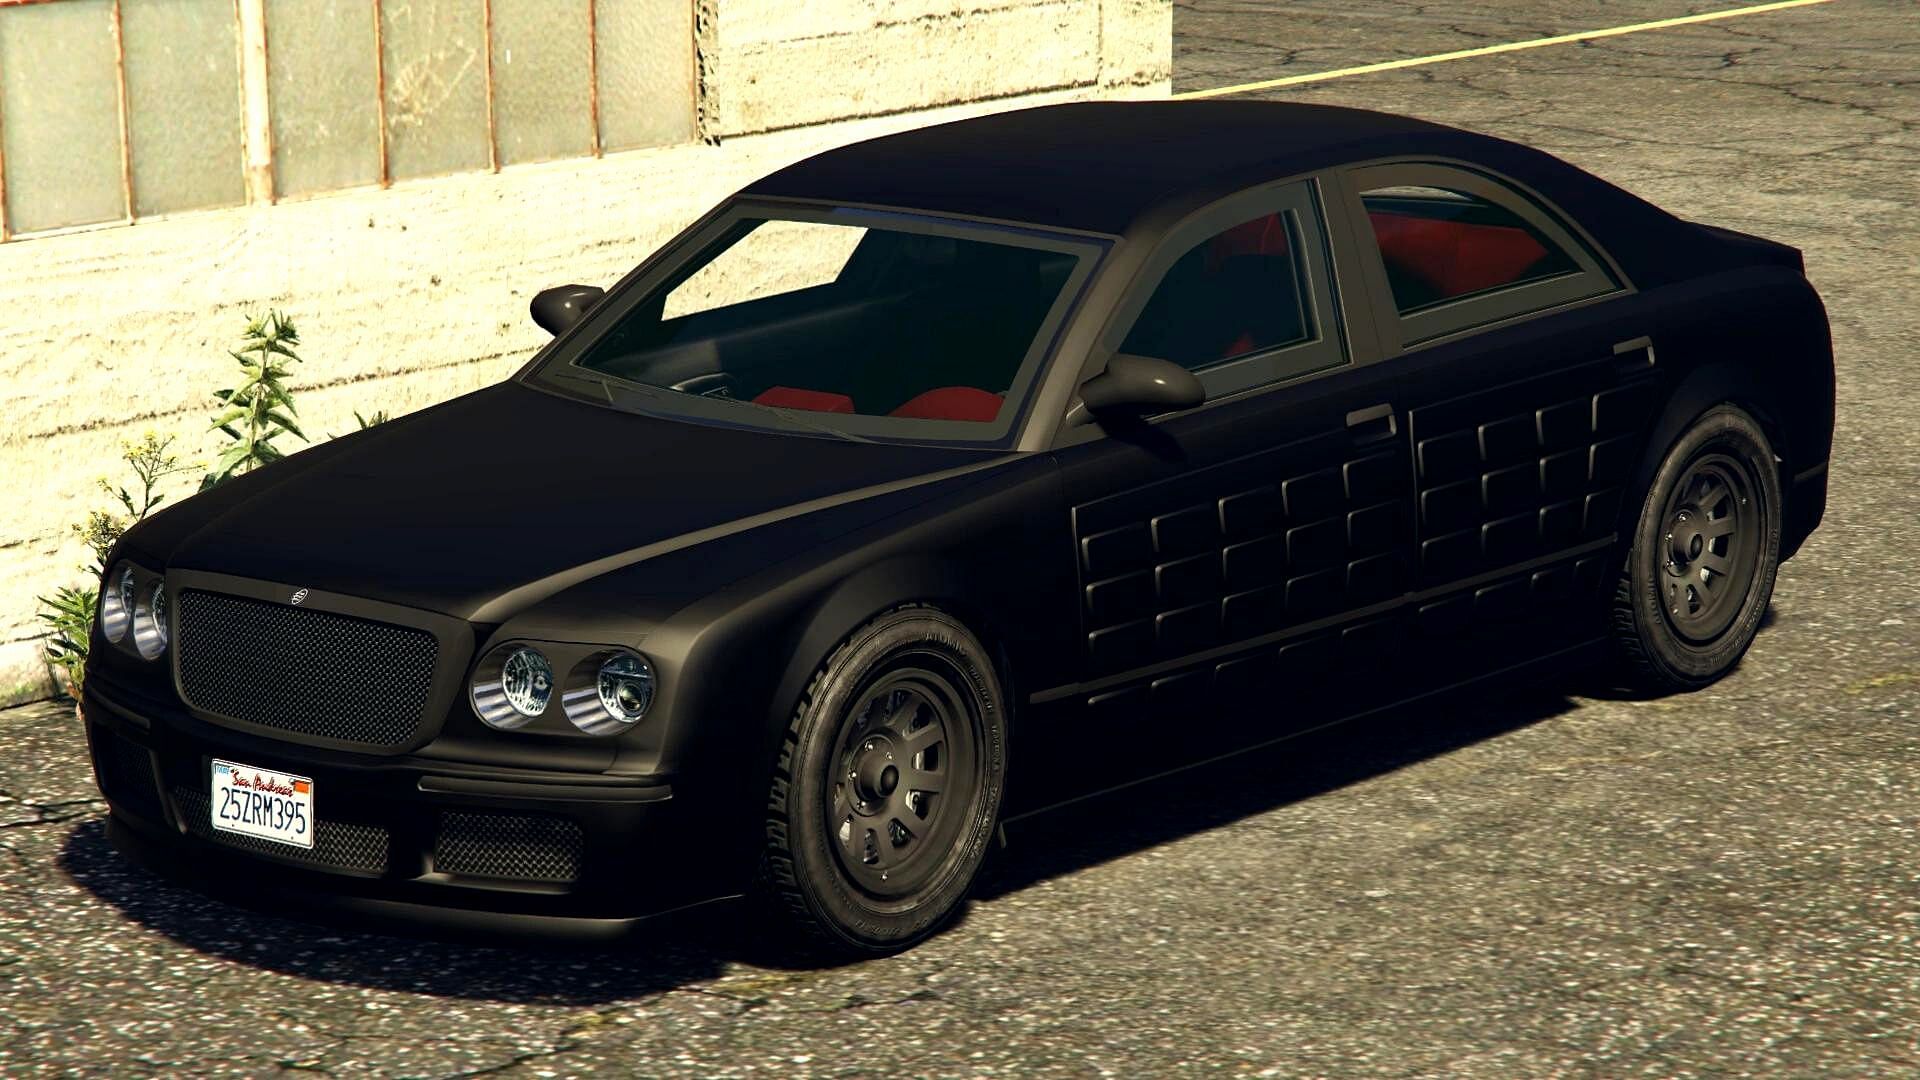 Why GTA Online players should get Enus Cognoscenti 55 (Armored) after the latest update